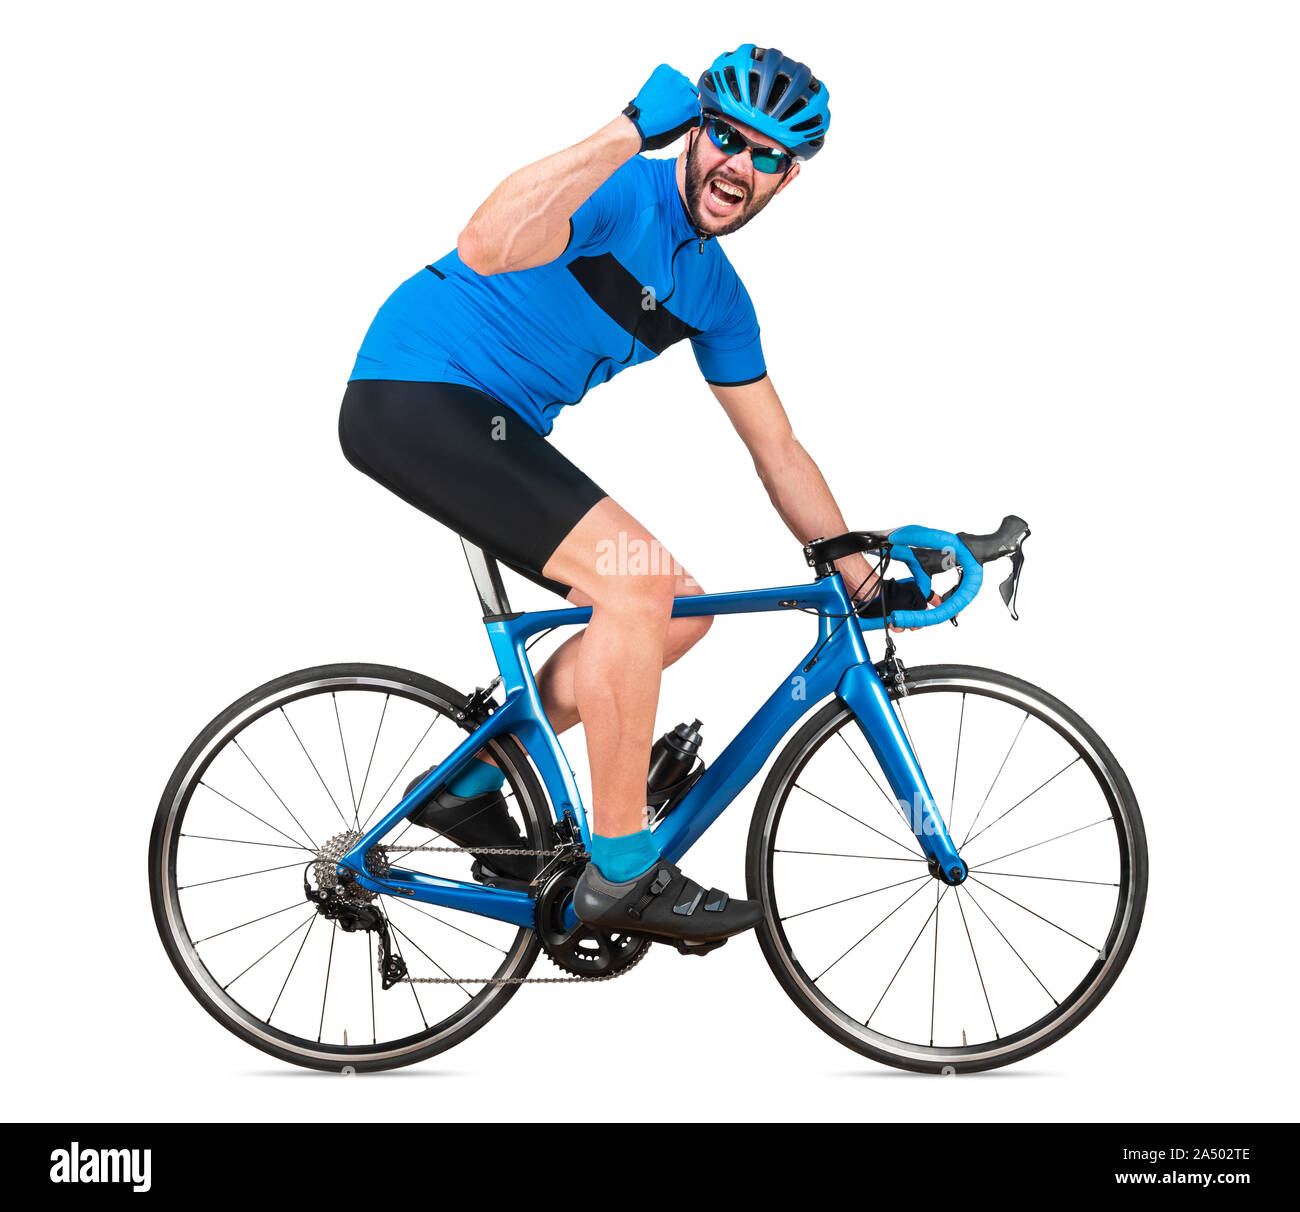 professional bicycle road racing cyclist racer in blue sports jersey on light carbon race cycle celebration celebrating win. sport exercise training c Stock Photo